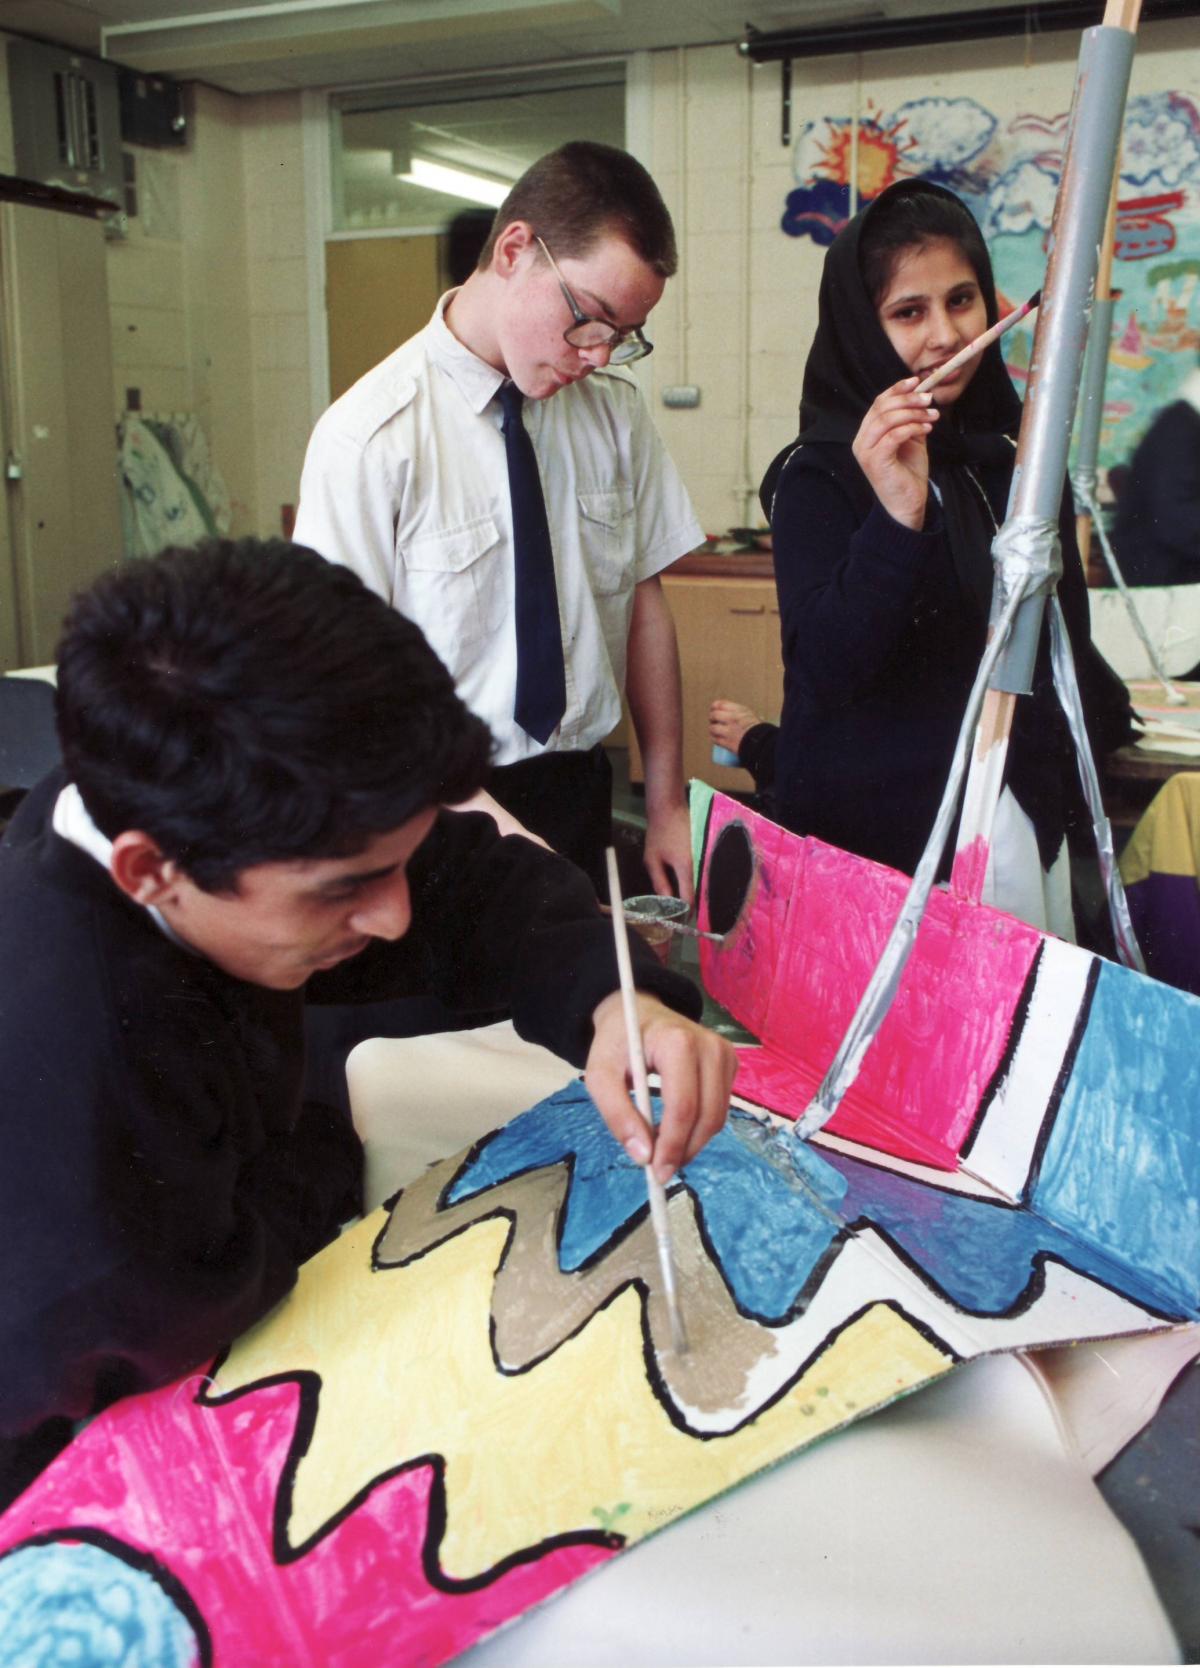 Grange Upper School pupils putting finishing touches to birds for festival parade